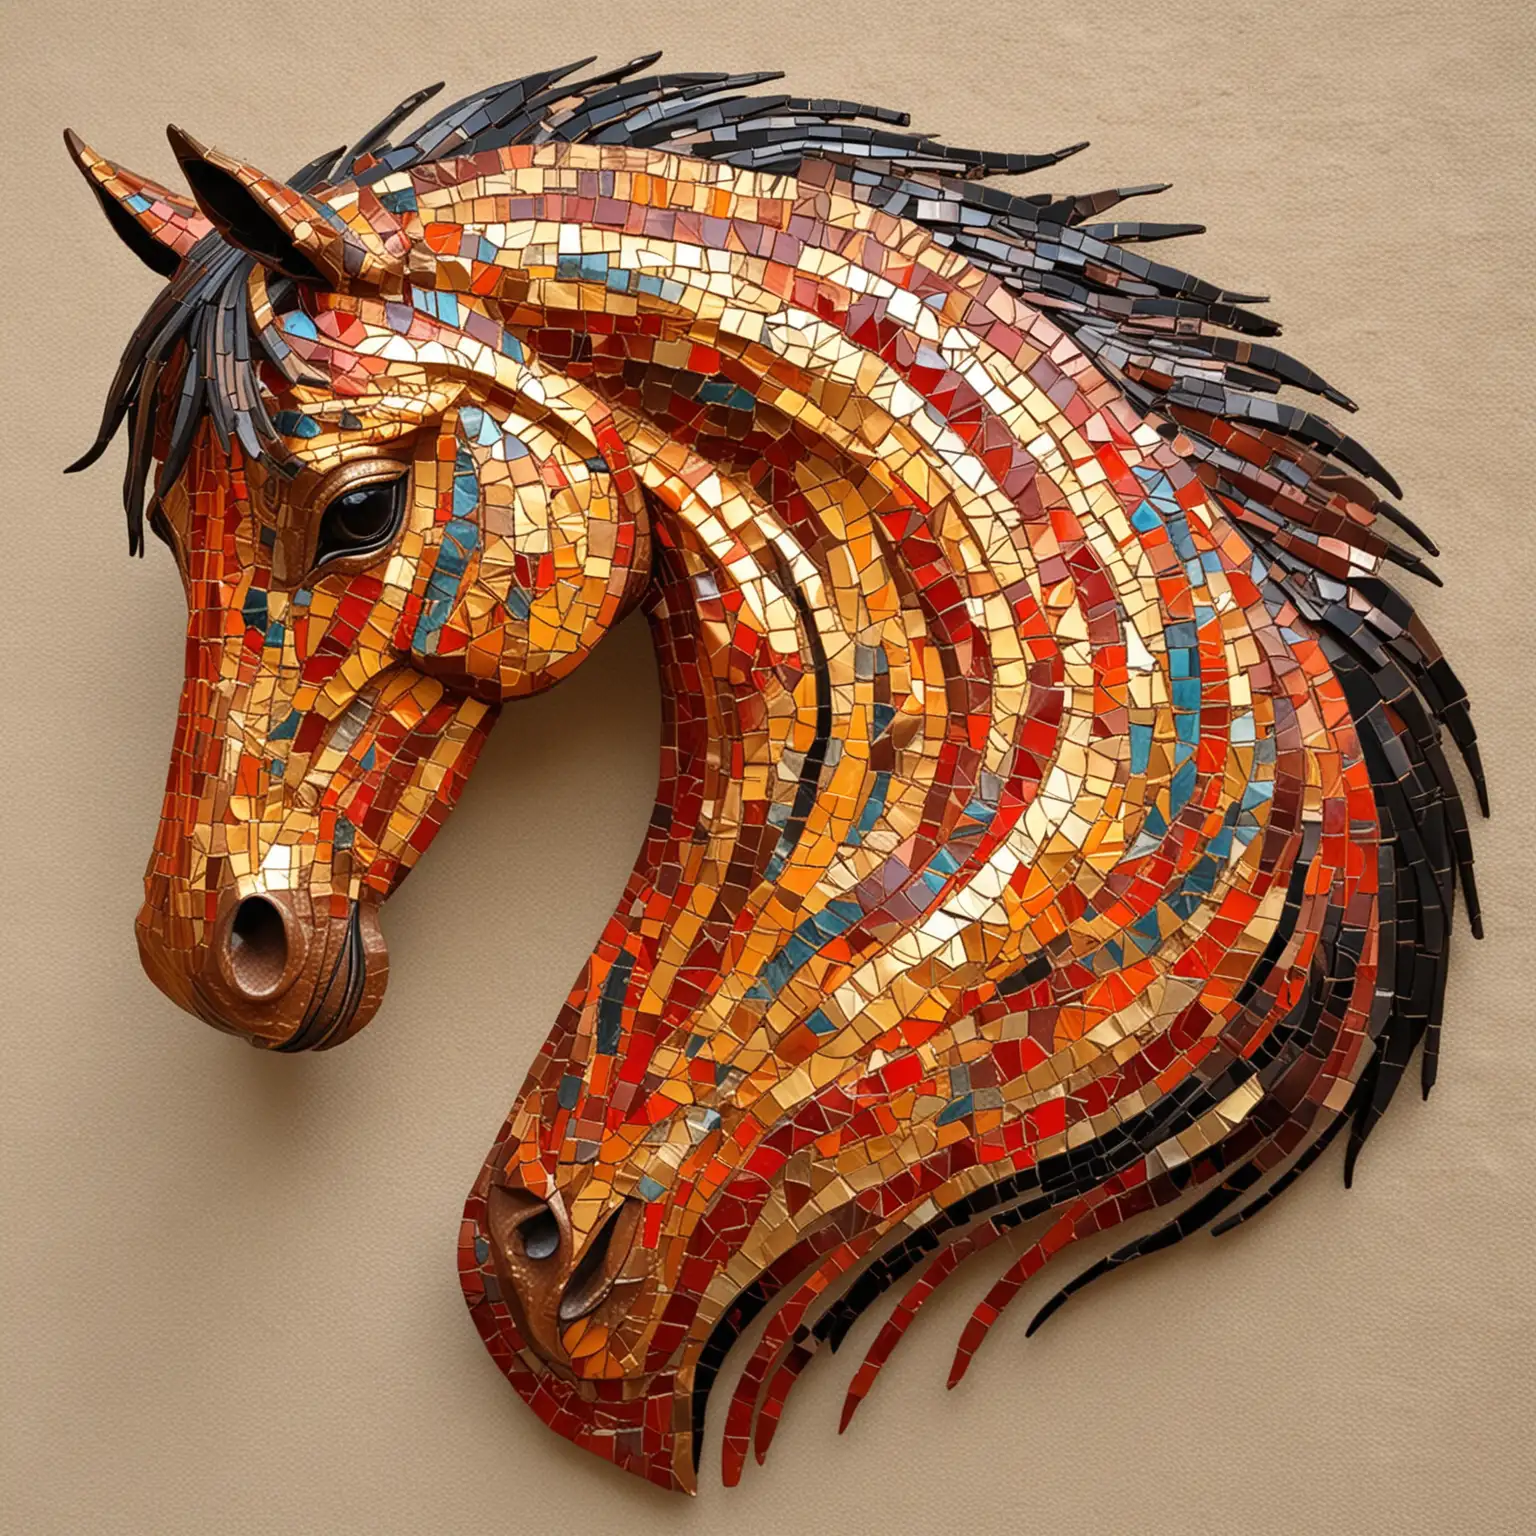 Majestic Horse with Lively Fire Mosaic Pattern in Gold Shimmering Colors